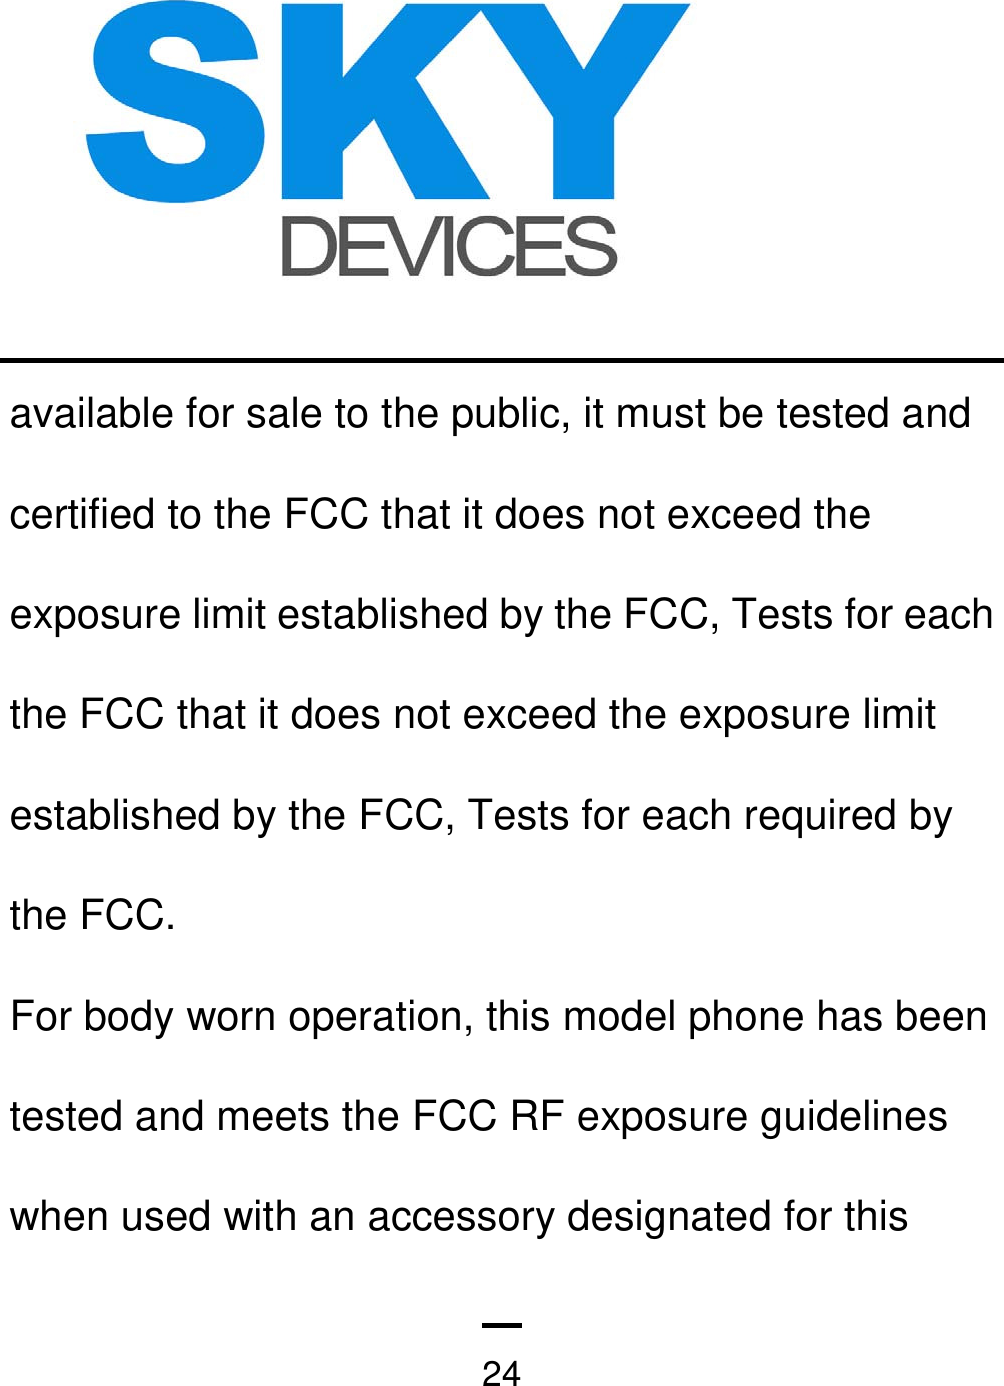   24available for sale to the public, it must be tested and certified to the FCC that it does not exceed the exposure limit established by the FCC, Tests for each the FCC that it does not exceed the exposure limit established by the FCC, Tests for each required by the FCC. For body worn operation, this model phone has been tested and meets the FCC RF exposure guidelines when used with an accessory designated for this 